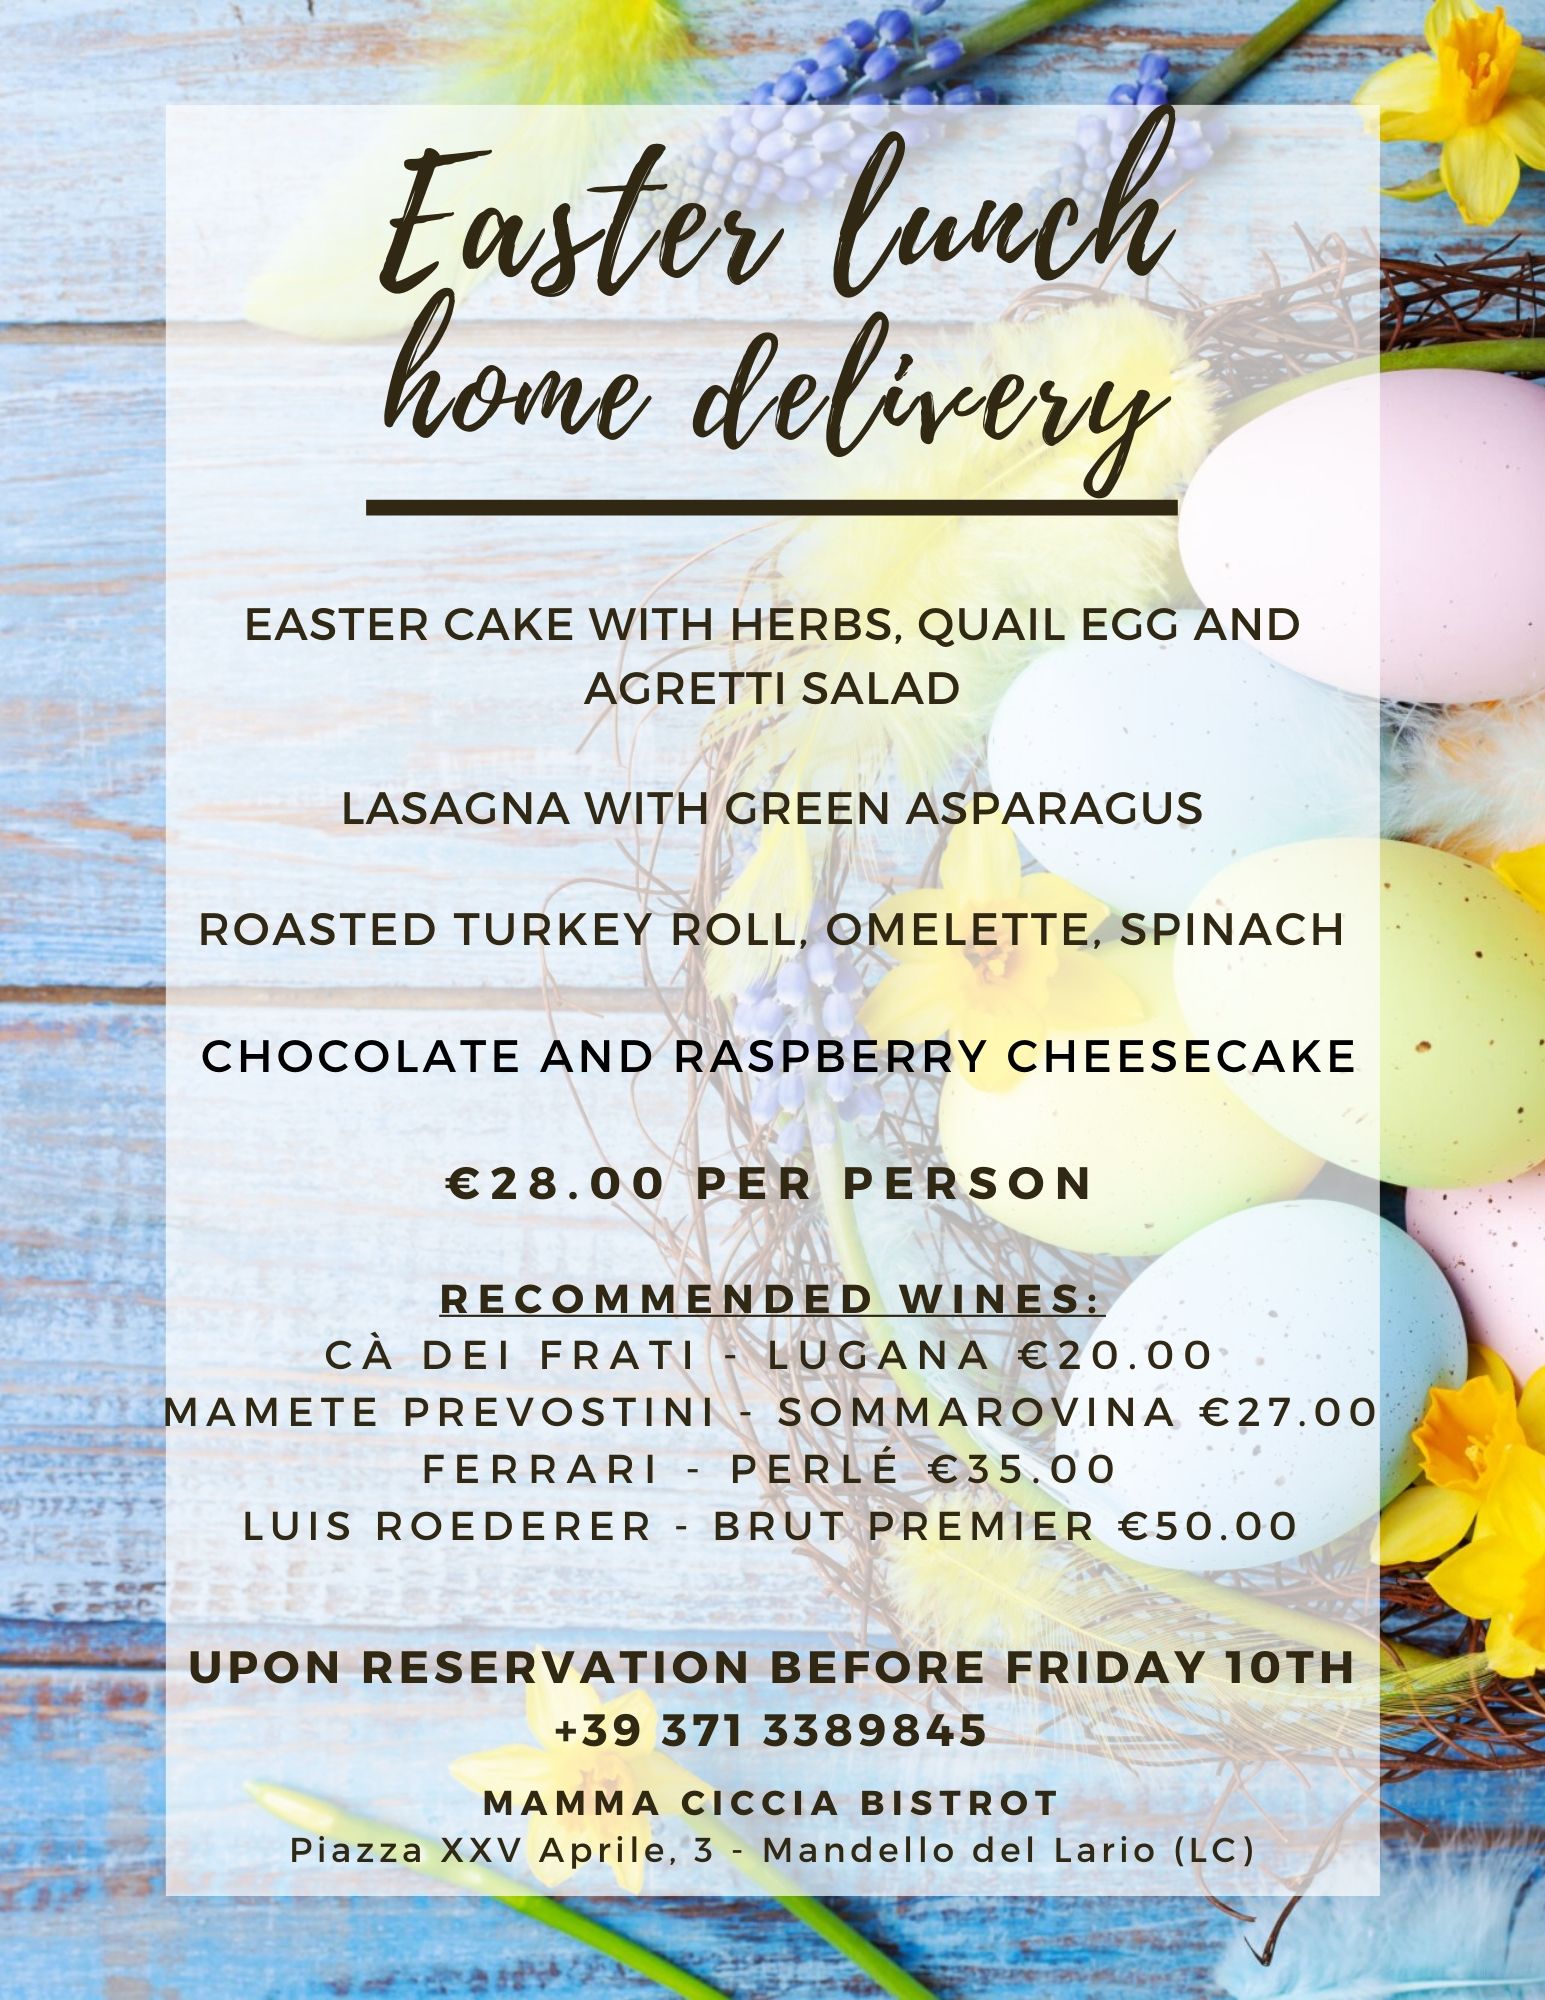 Easter lunch DELIVERY: Immagine 1